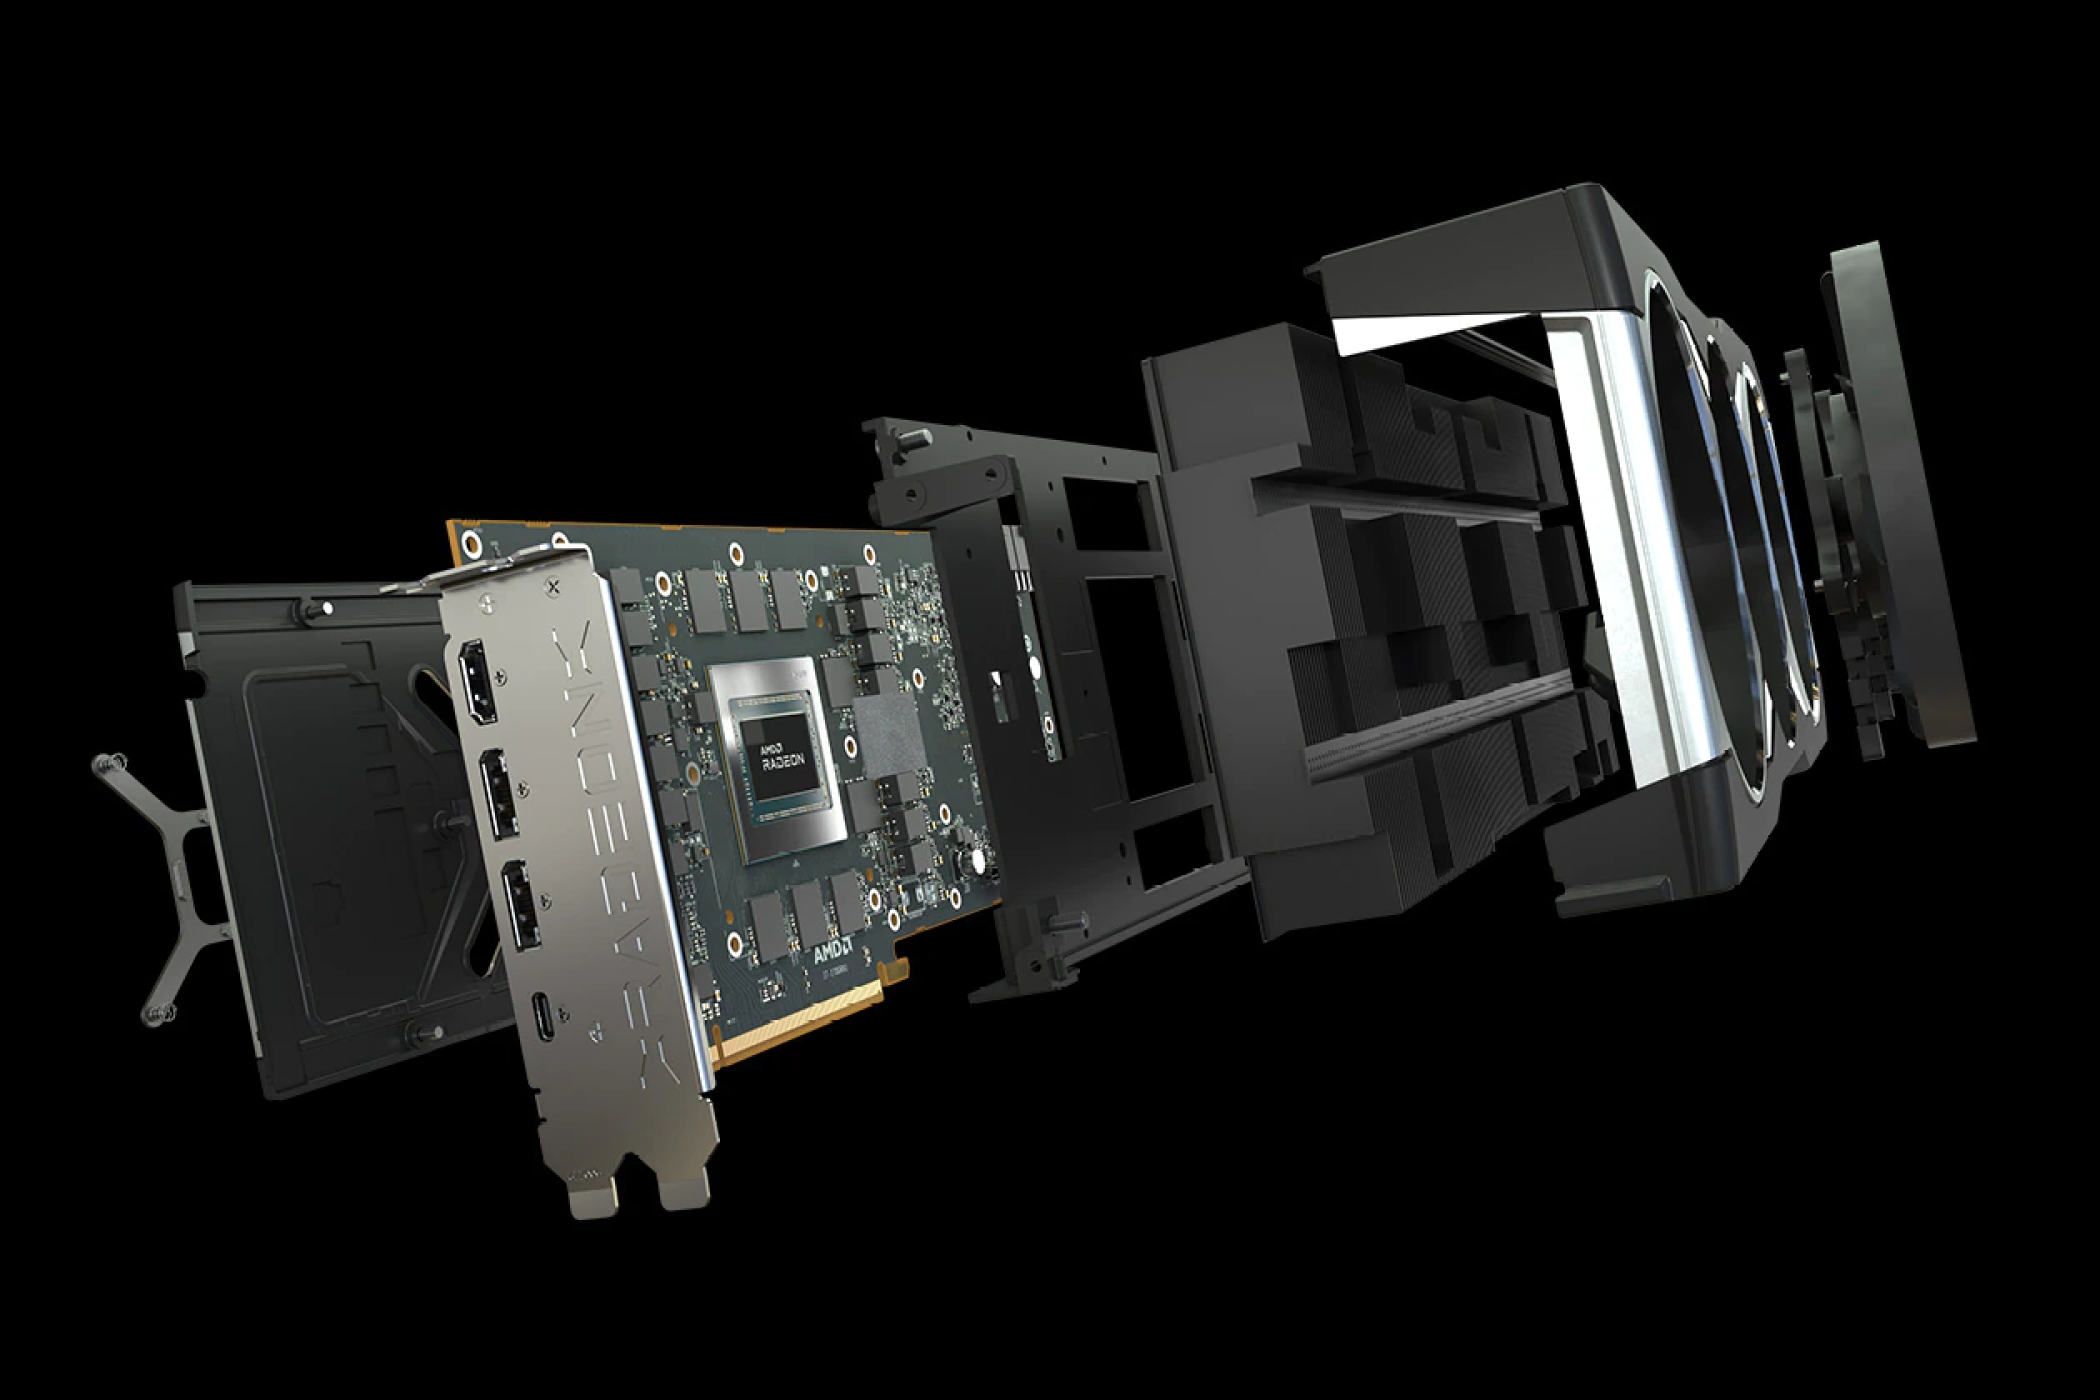 A cross section of the AMD Radeon RX 6800 XT graphics card.